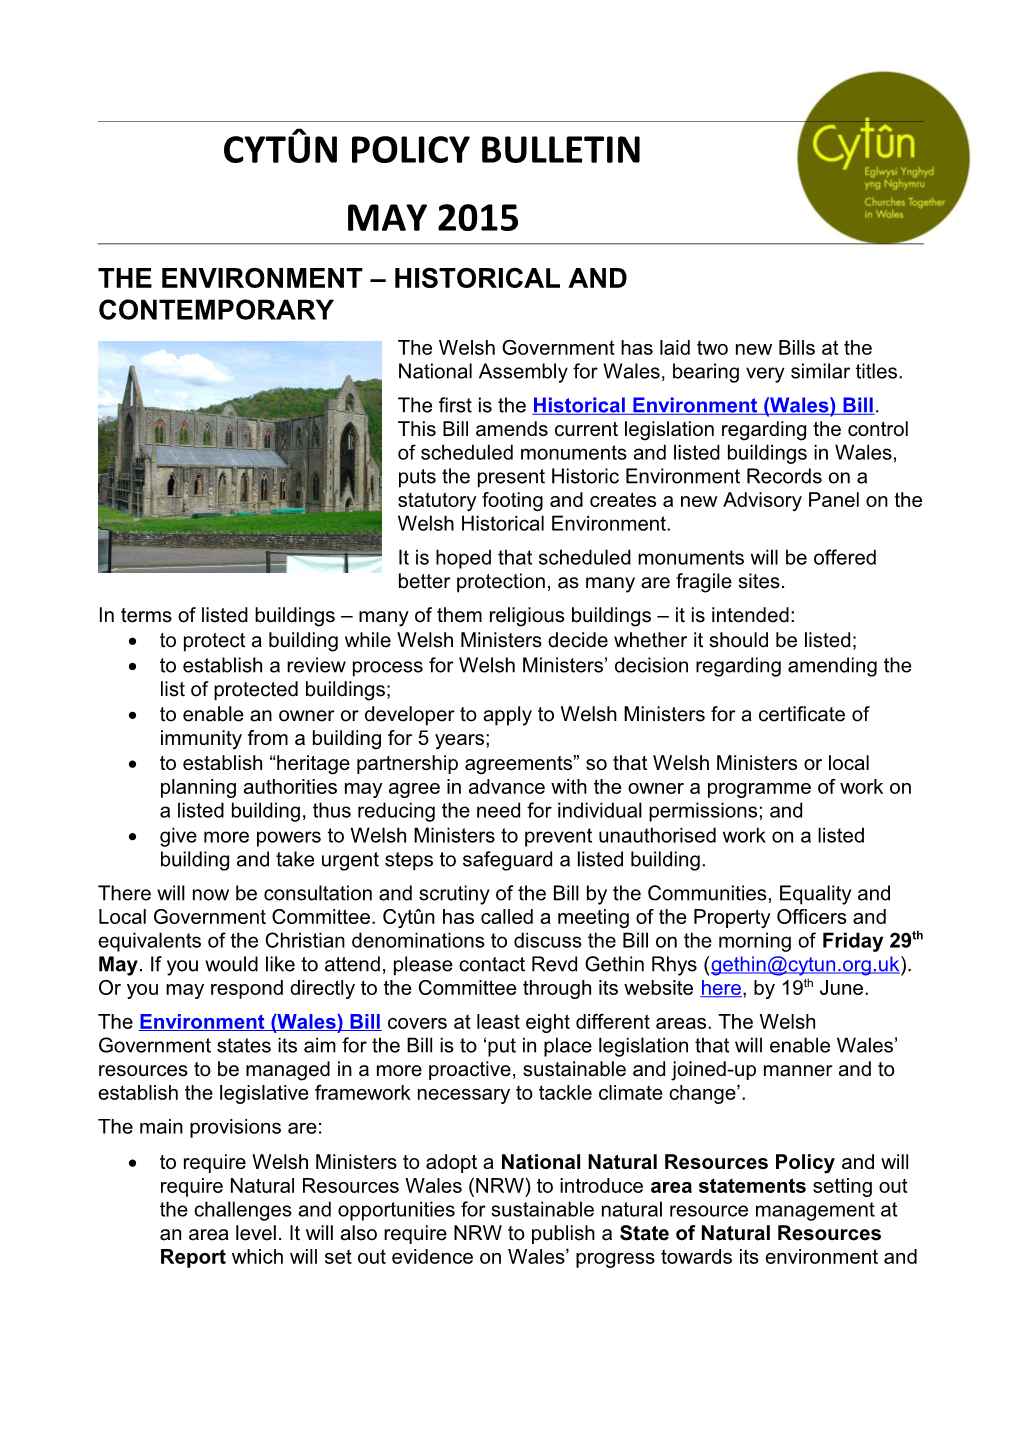 The Environment Historical and Contemporary